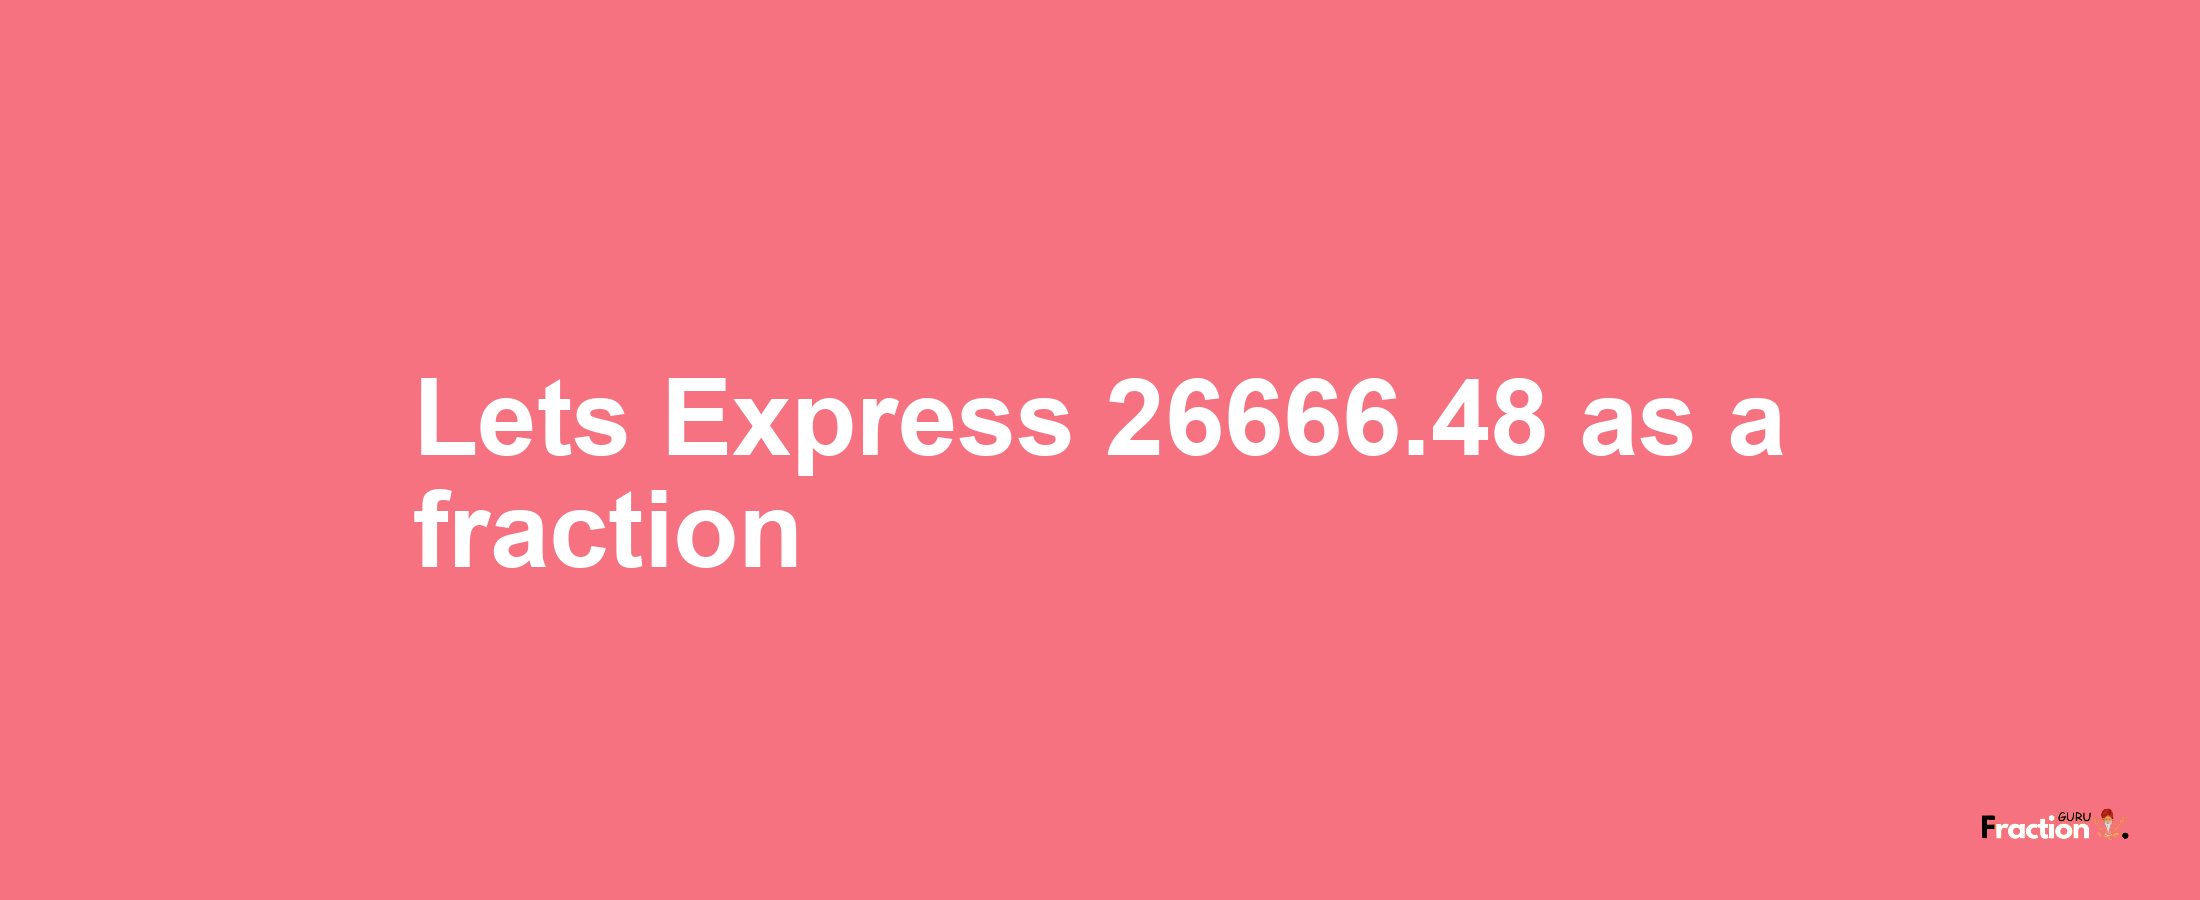 Lets Express 26666.48 as afraction